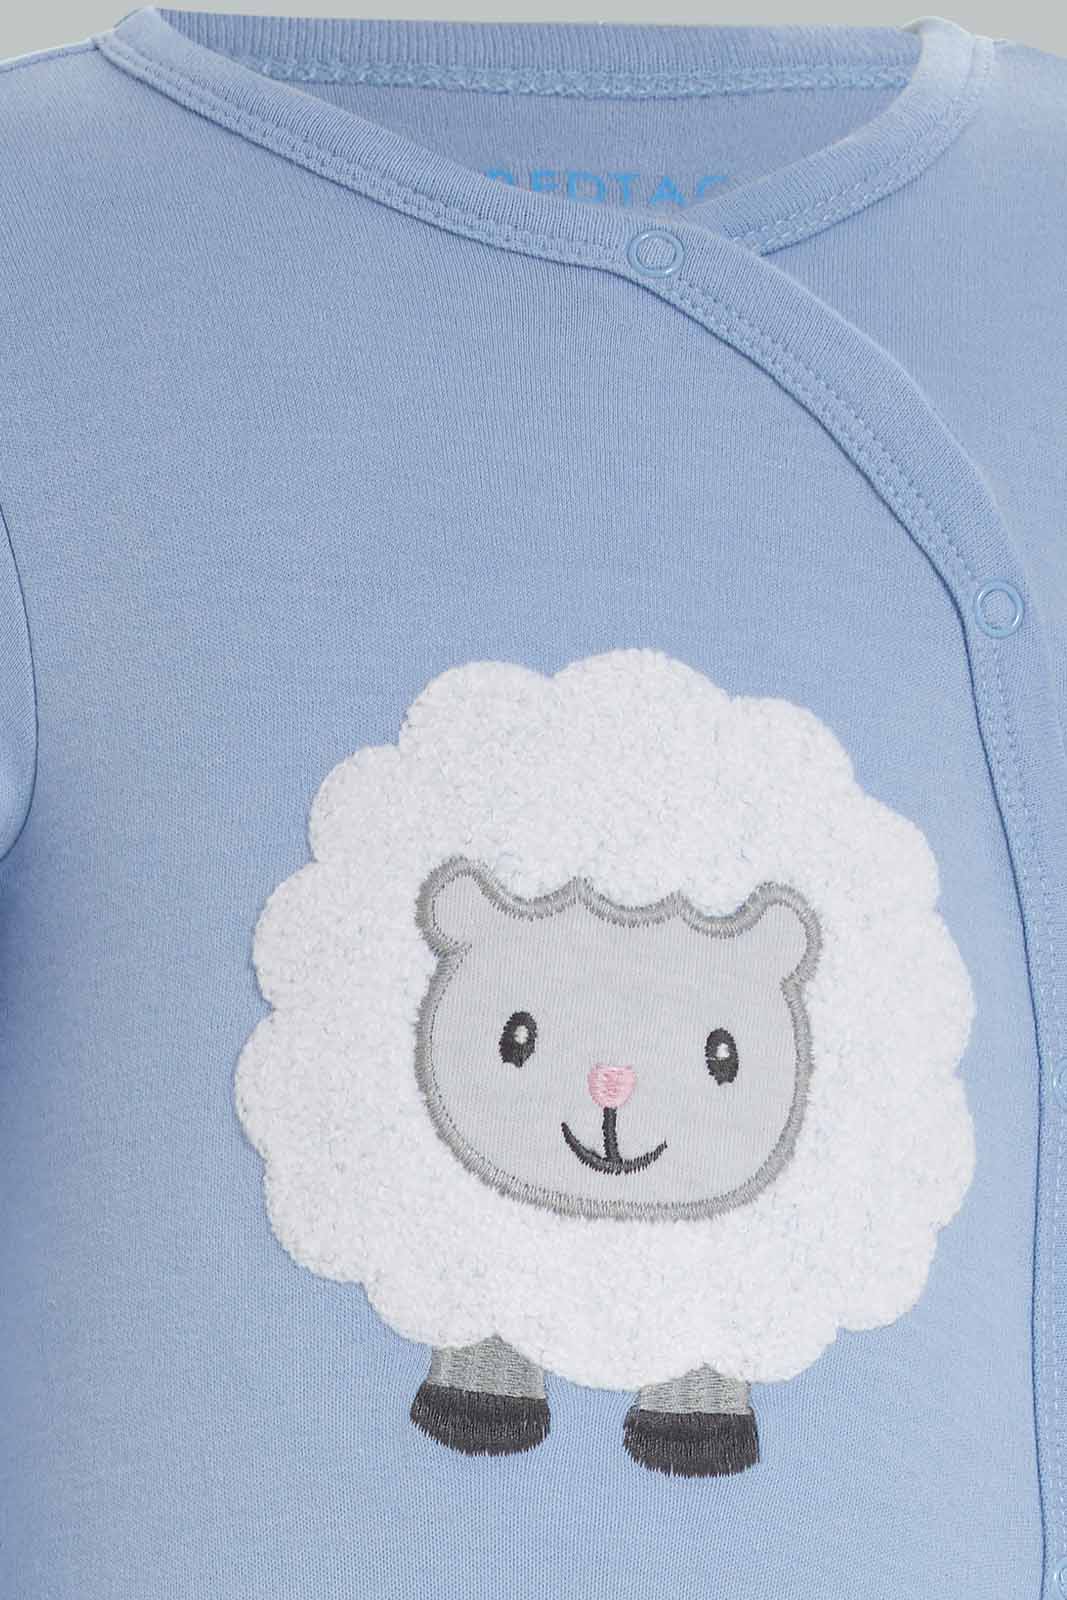 Redtag-Assorted-2Pc-Novelty-Sheep-Sleepsuit-Boy-Category:Sleepsuits,-Colour:Apricot,-Deals:New-In,-Dept:New-Born,-Filter:Baby-(0-to-12-Mths),-NBF-Sleepsuits,-New-In-NBF-APL,-Non-Sale,-S23A,-Section:Boys-(0-to-14Yrs)-Baby-